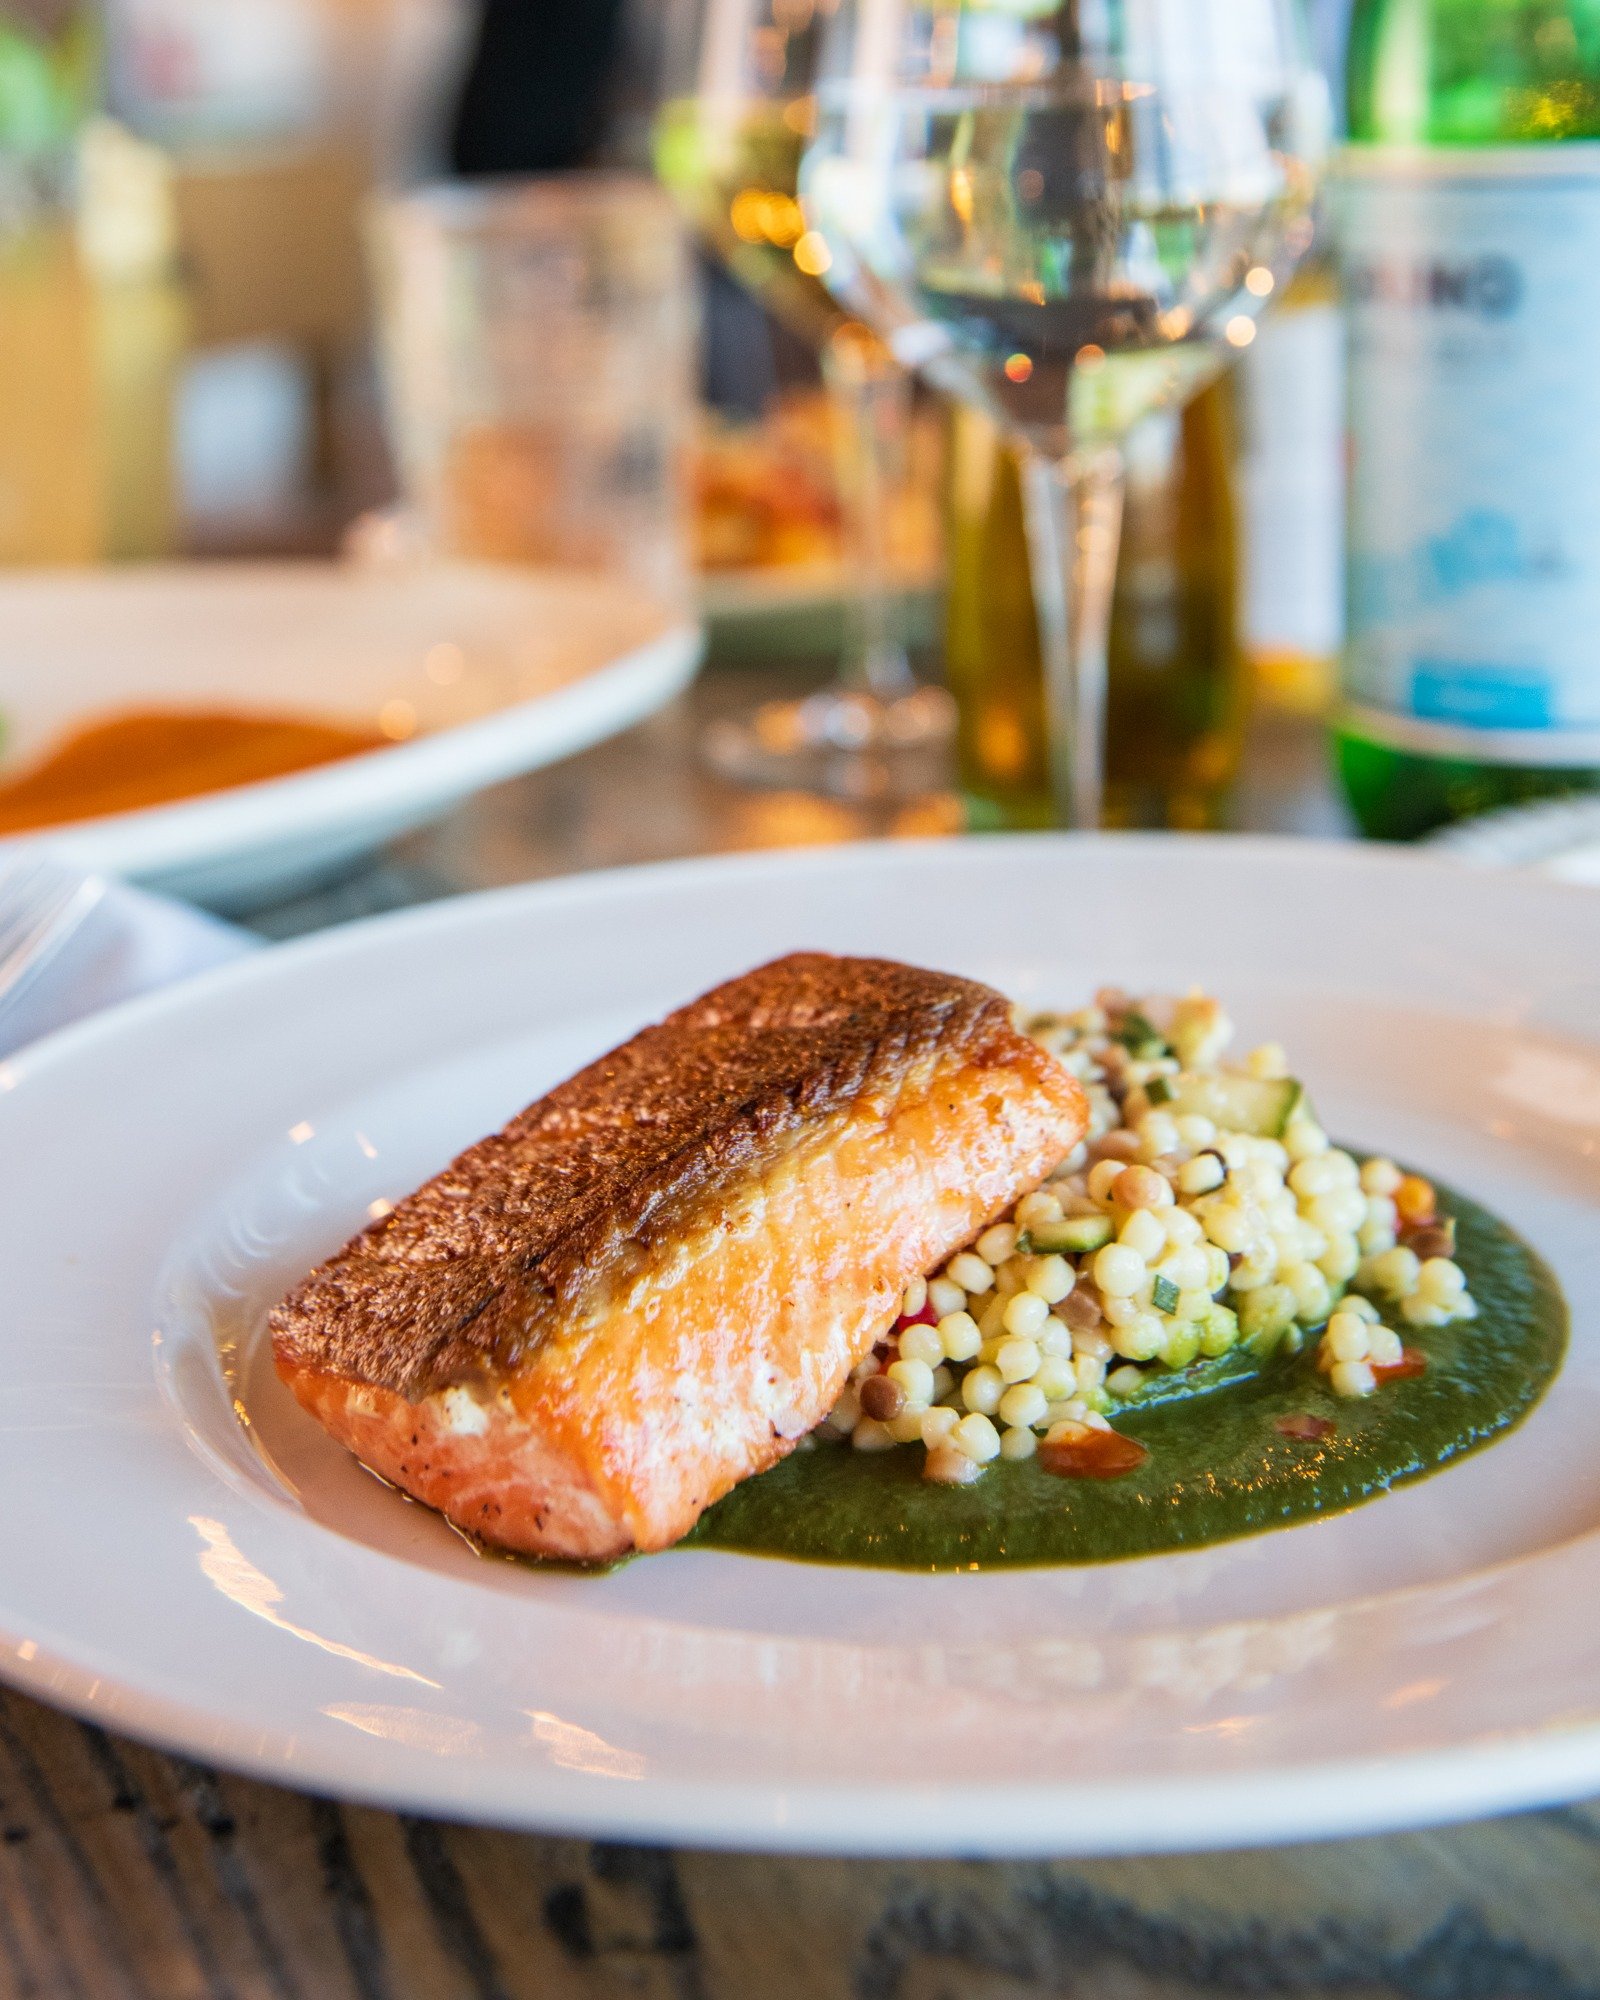 Make plans to join us this week! Try one of our popular seafood dishes like this crispy skin salmon with vibrant summer fregola, and sweet herb puree. #letseat